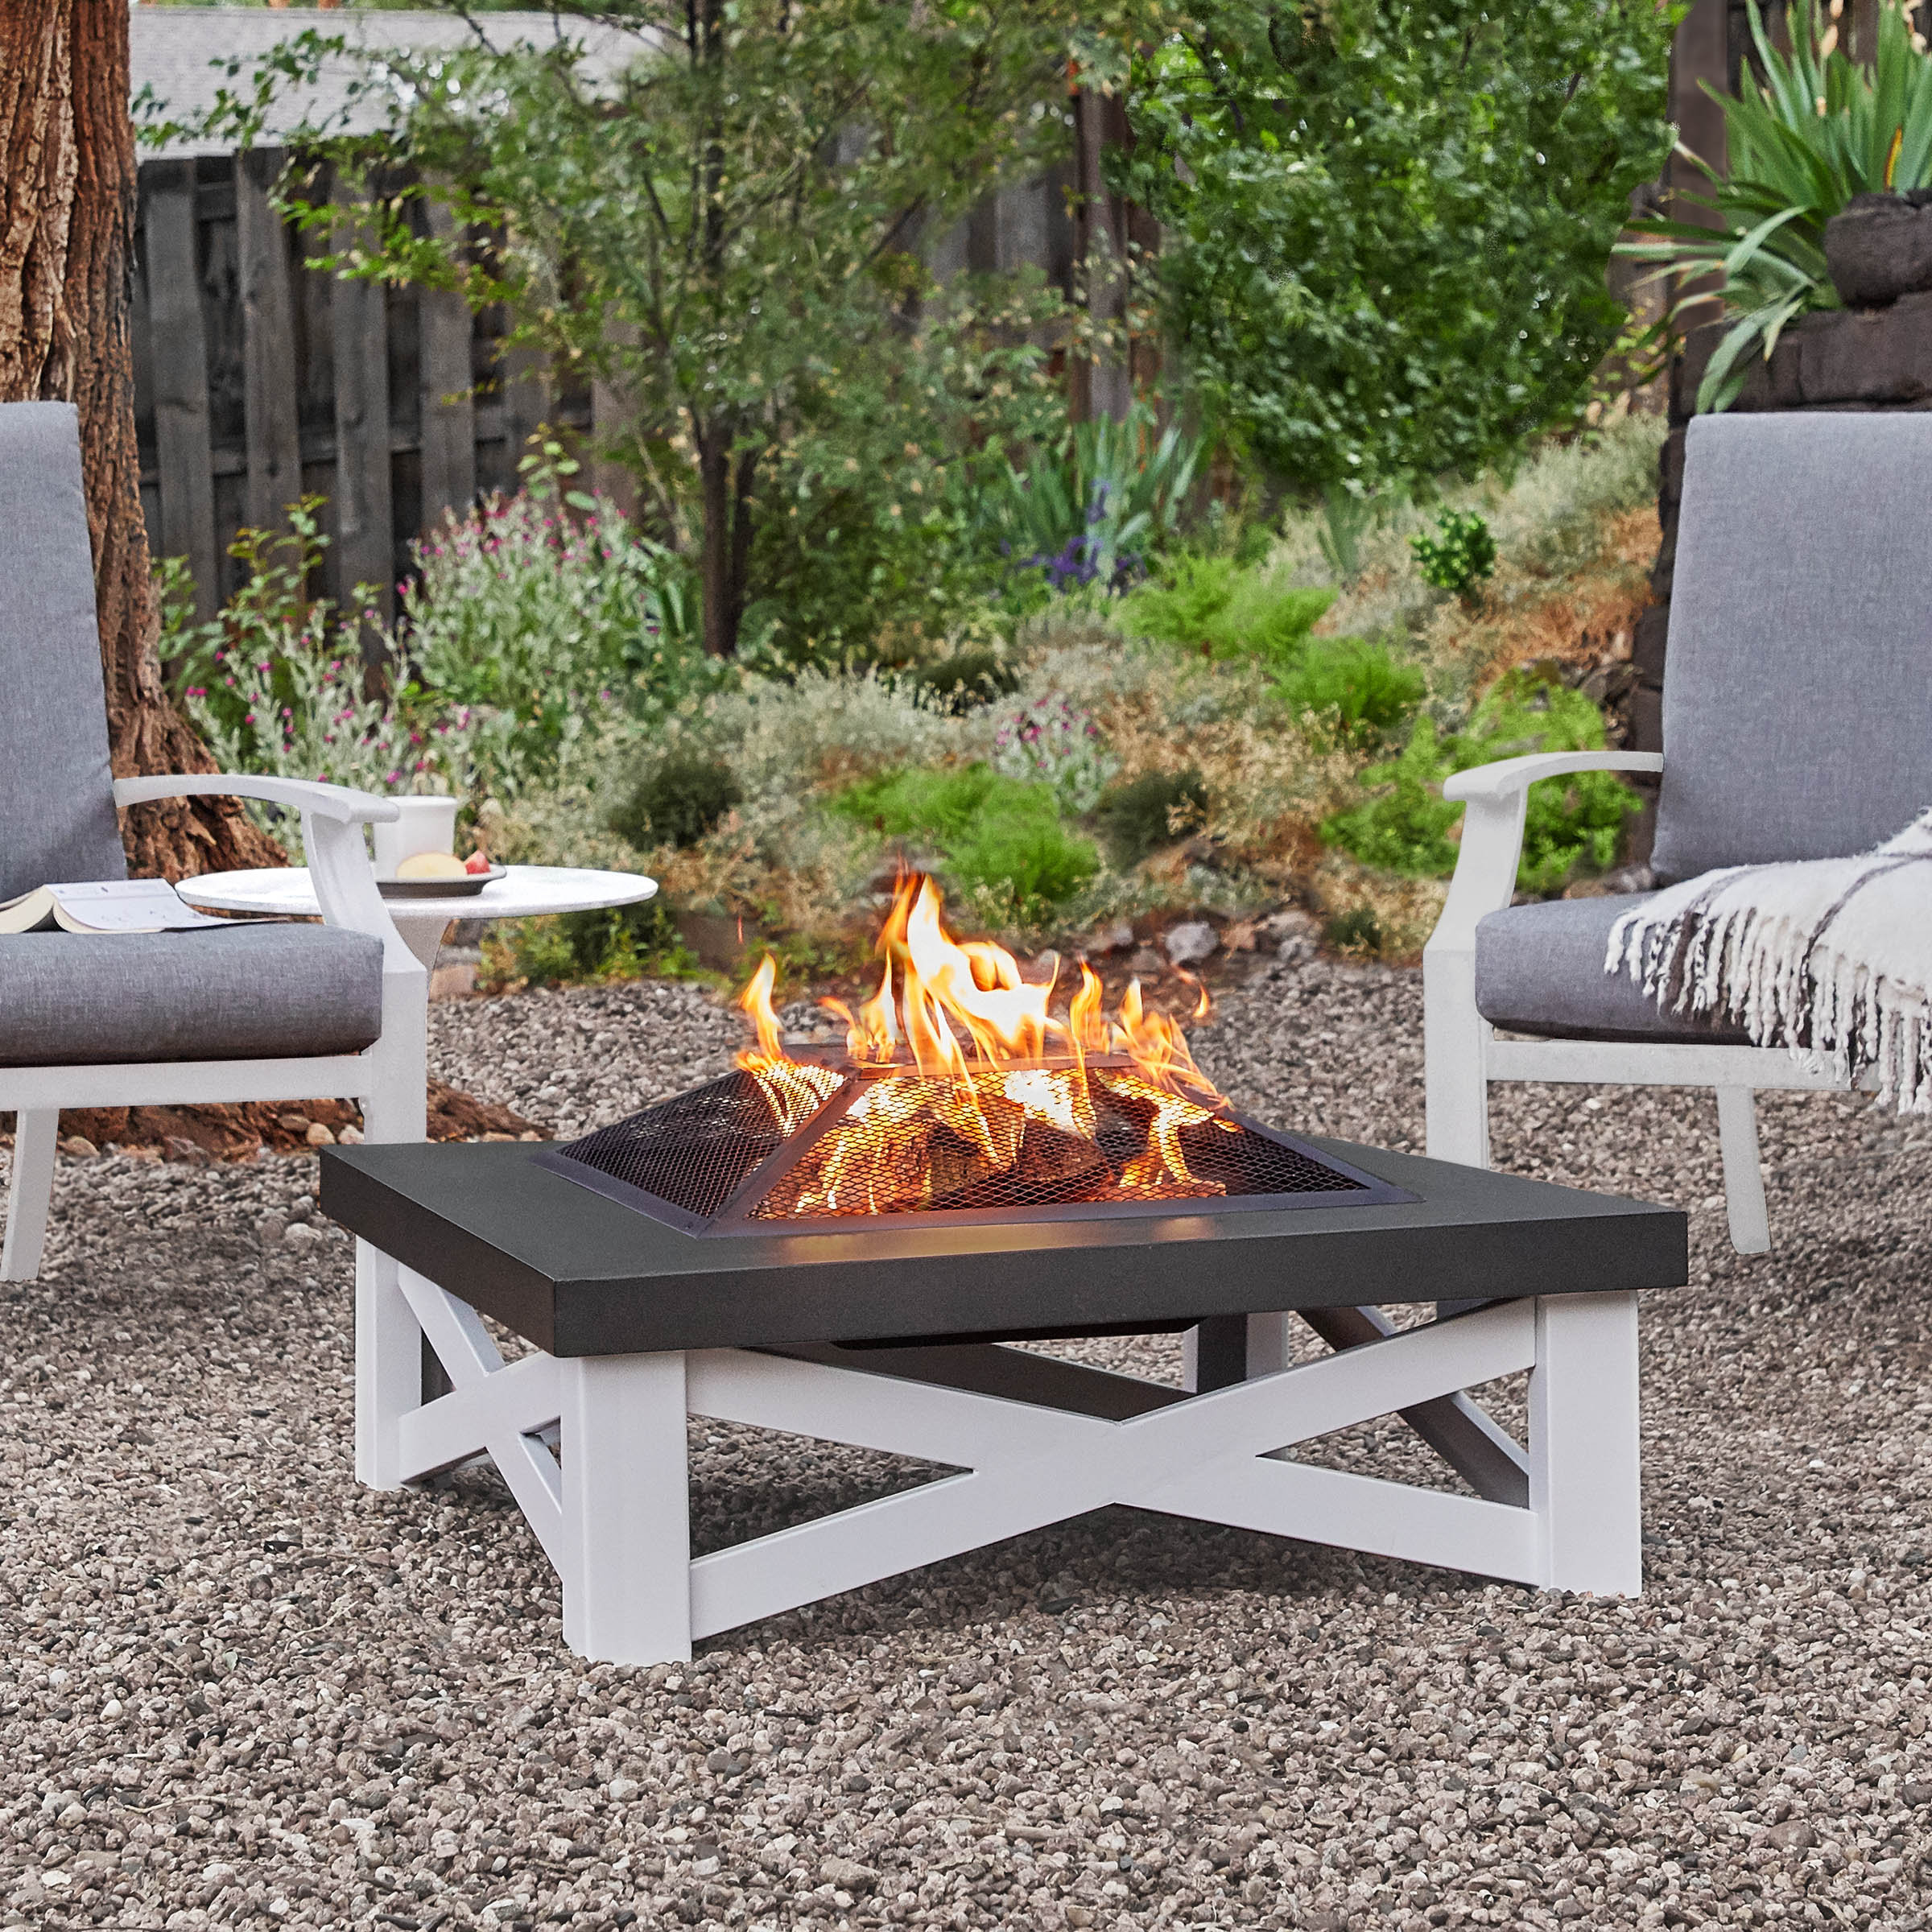 Real Flame Austin Steel Wood Burning Fire Pit & Reviews